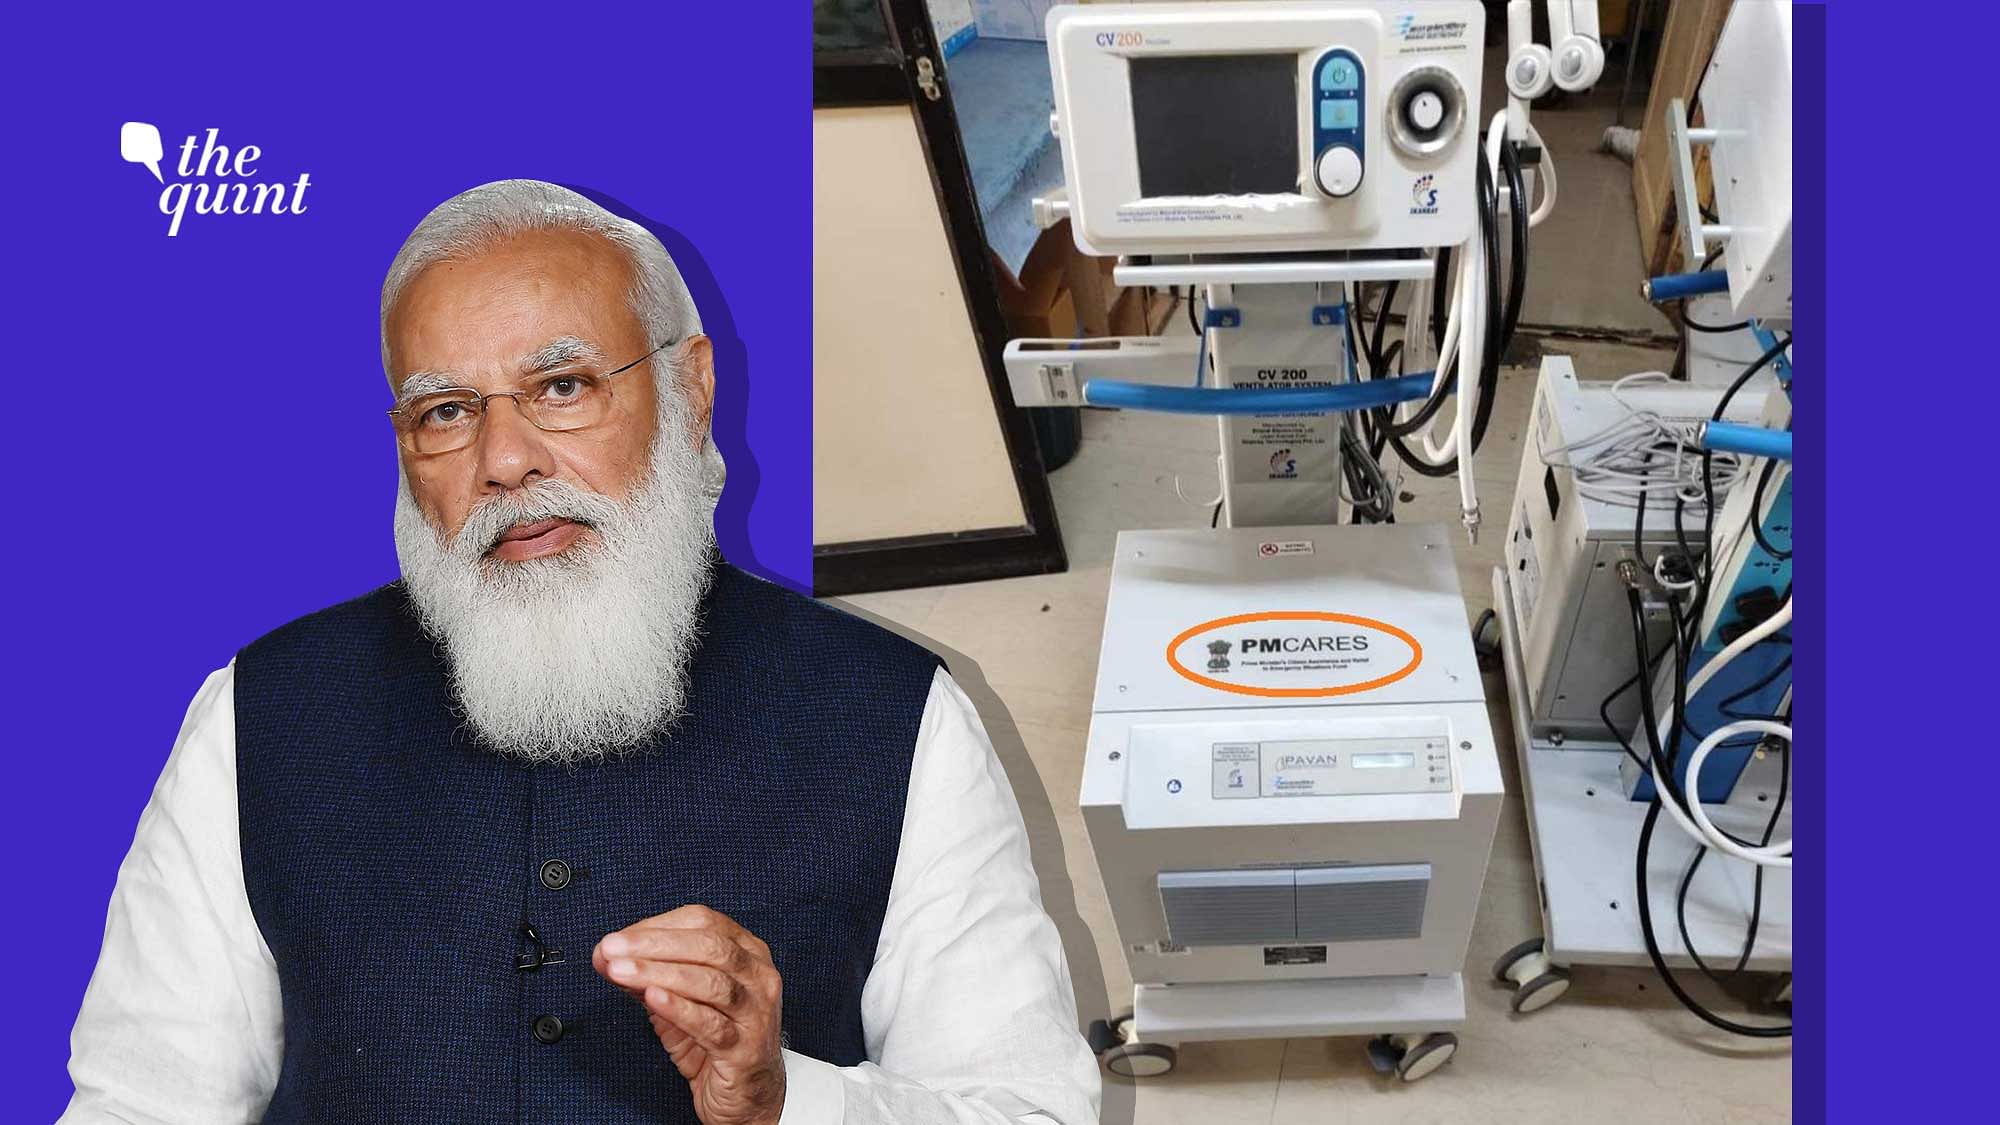 While India is choking due to COVID-19 2nd surge, red-tape and non-payment have delayed delivery of life-saving medical equipment, including 9.5K LFO ventilators, that were funded by PM CARES Fund.